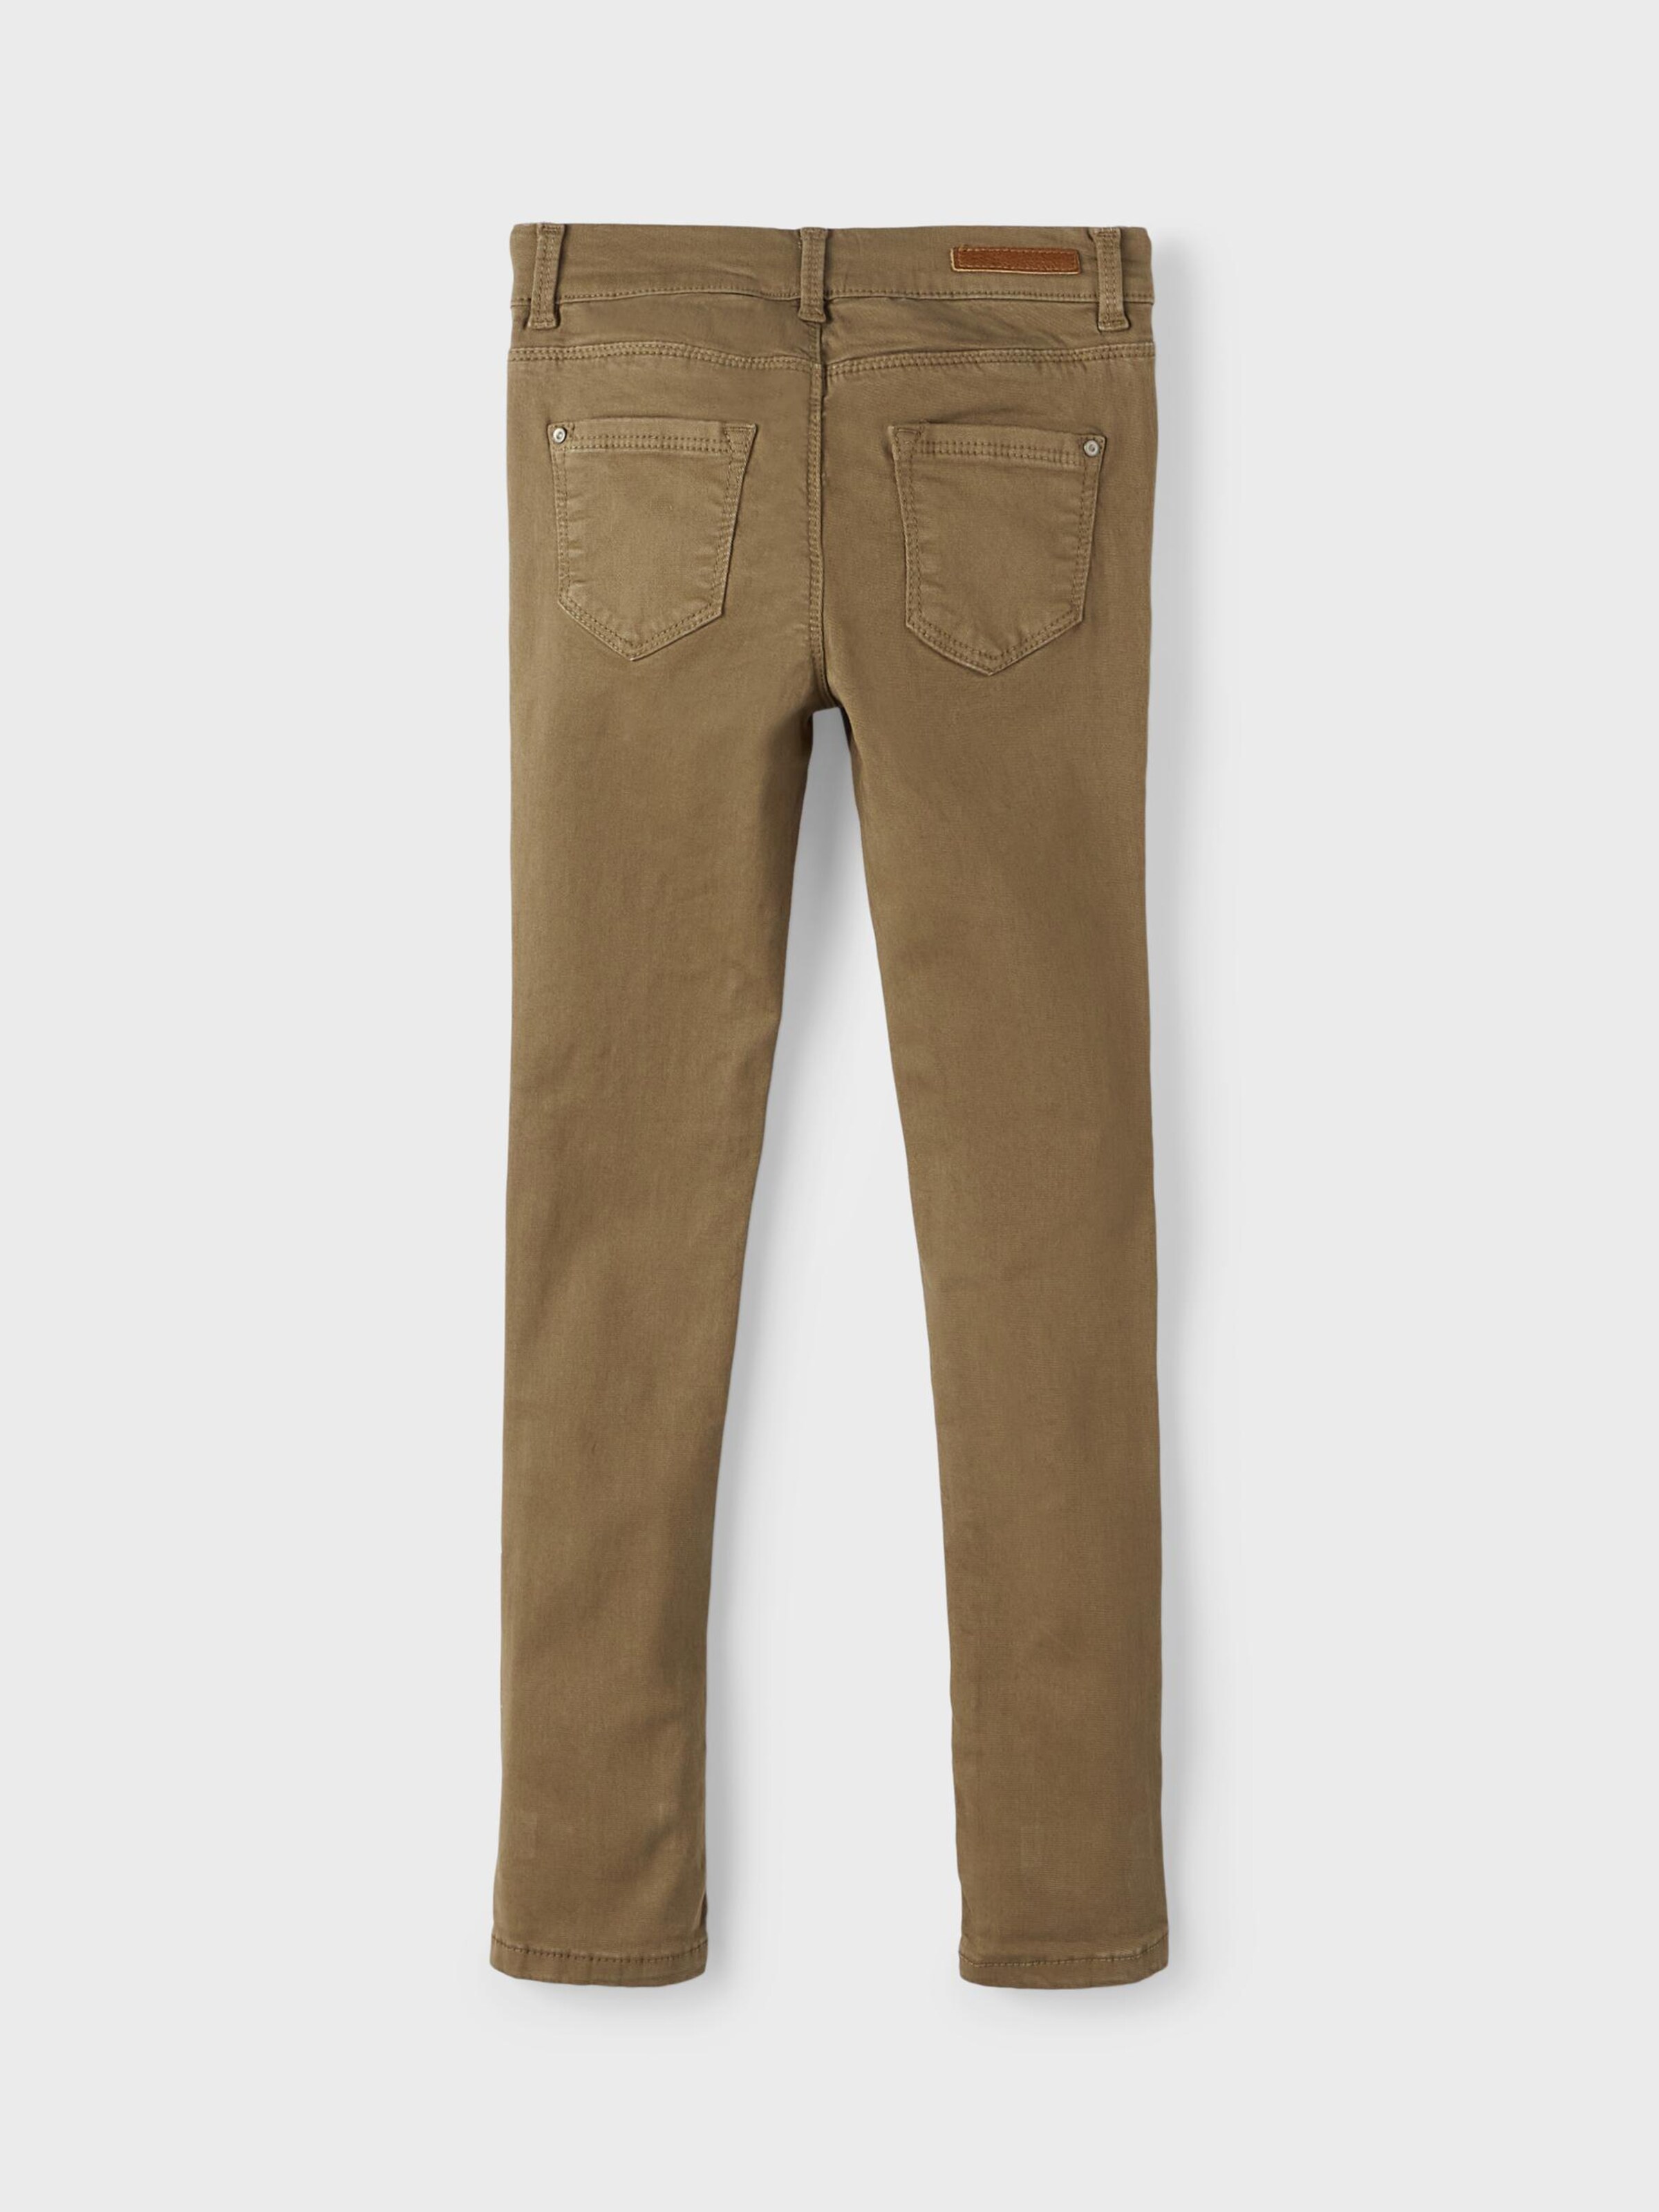 Kinder Teens (Gr. 140-176) NAME IT Jeans 'Polly' in Taupe - FK51341